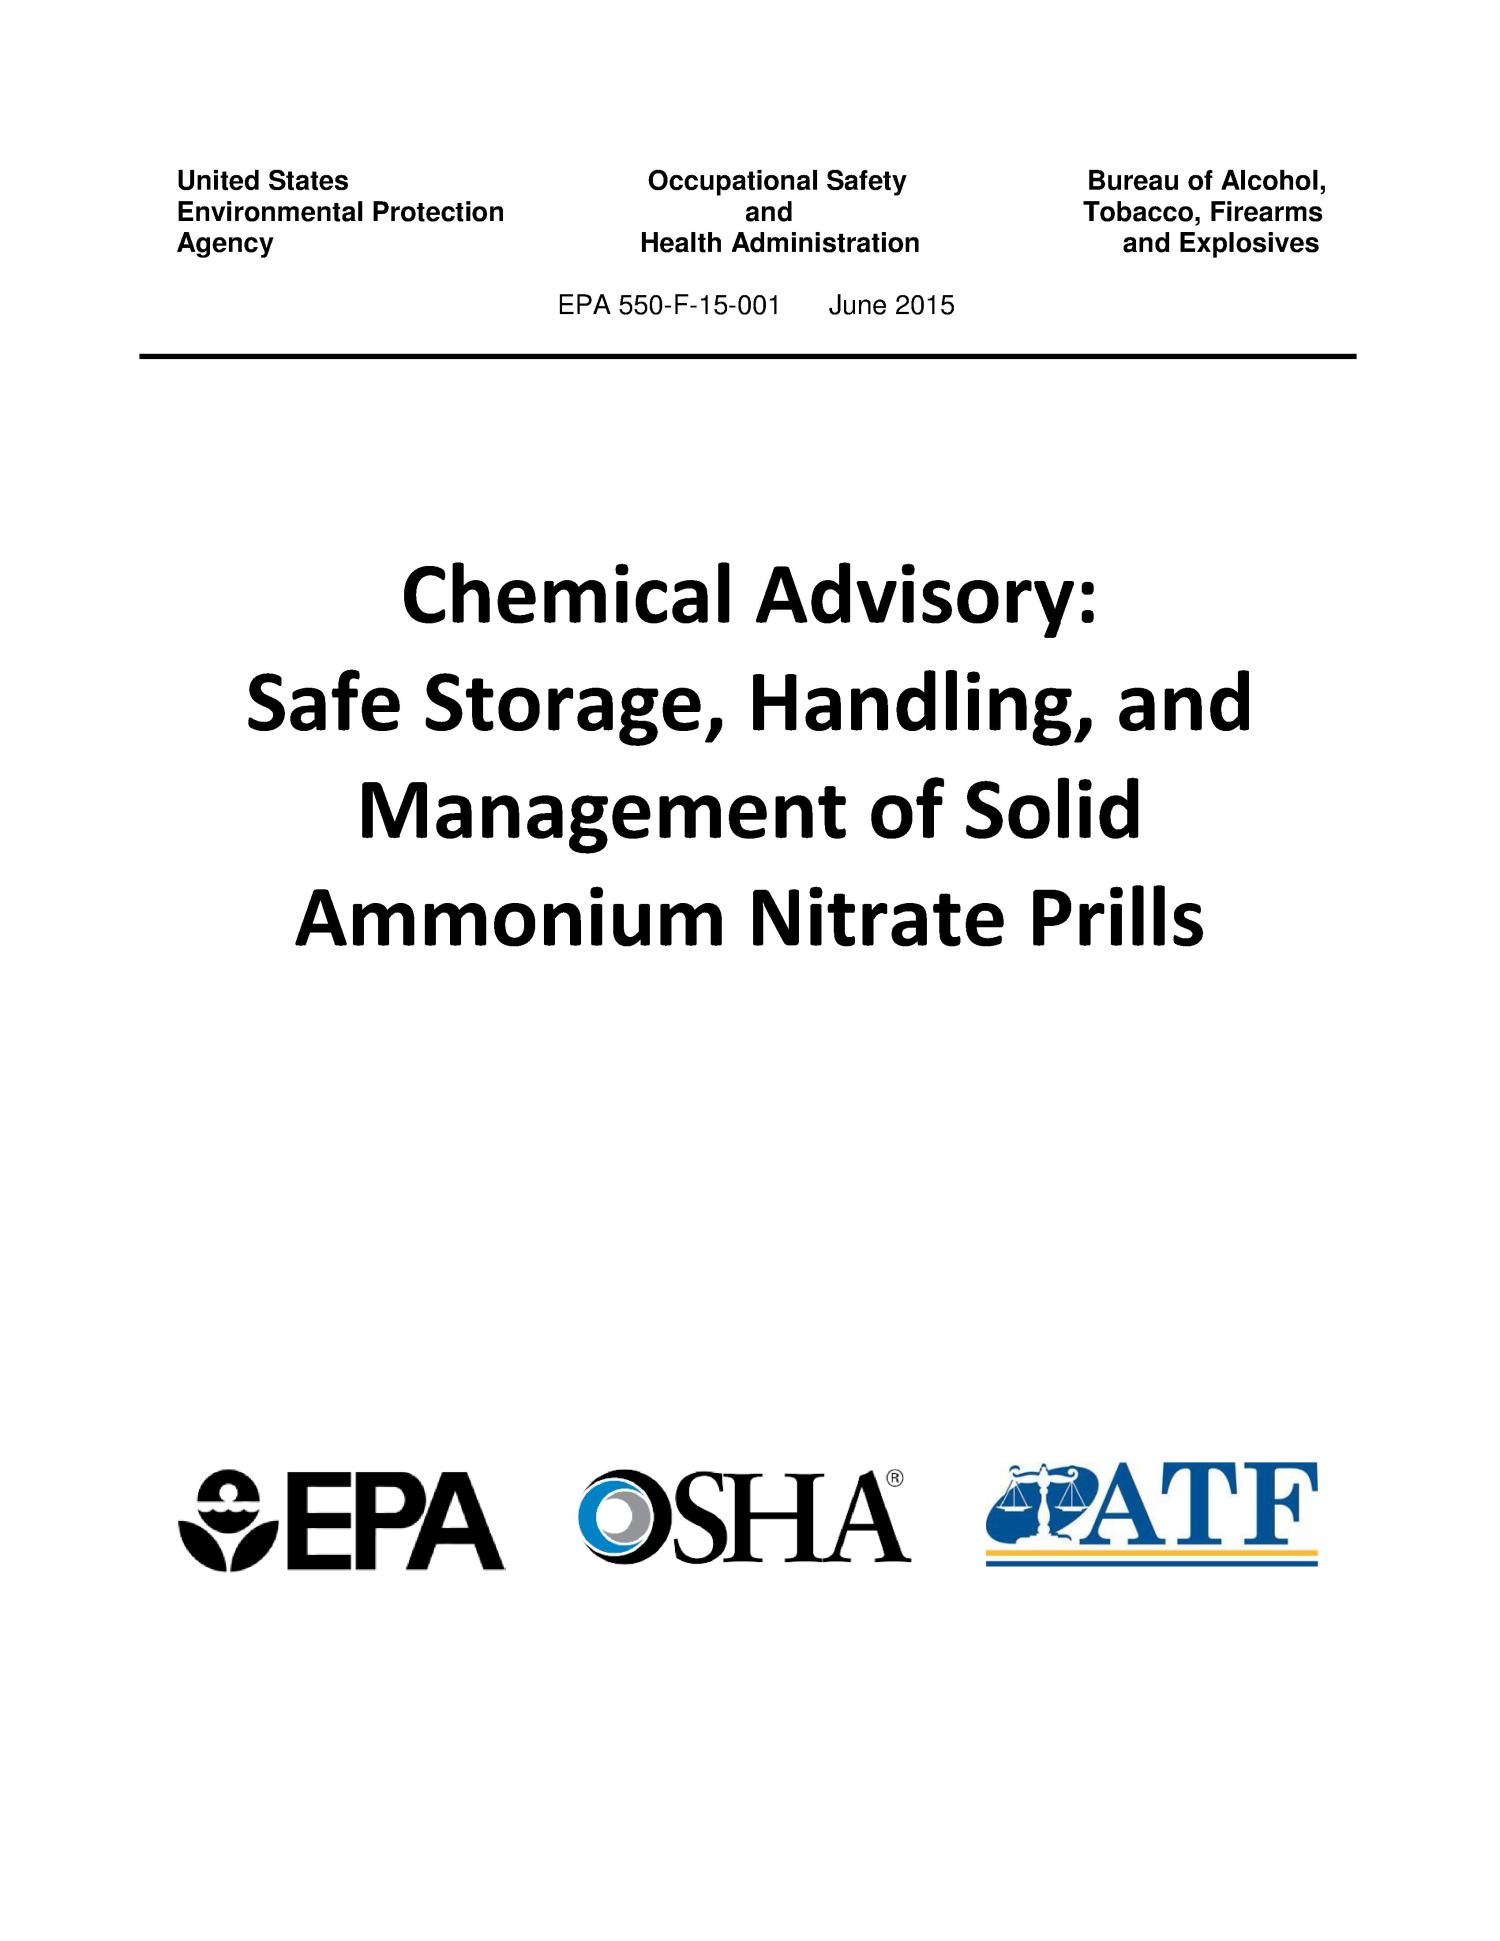 Chemical Advisory: Safe Storage, Handling, and Management of Solid Ammonium Nitrate Prills
                                                
                                                    [Sequence #]: 1 of 17
                                                